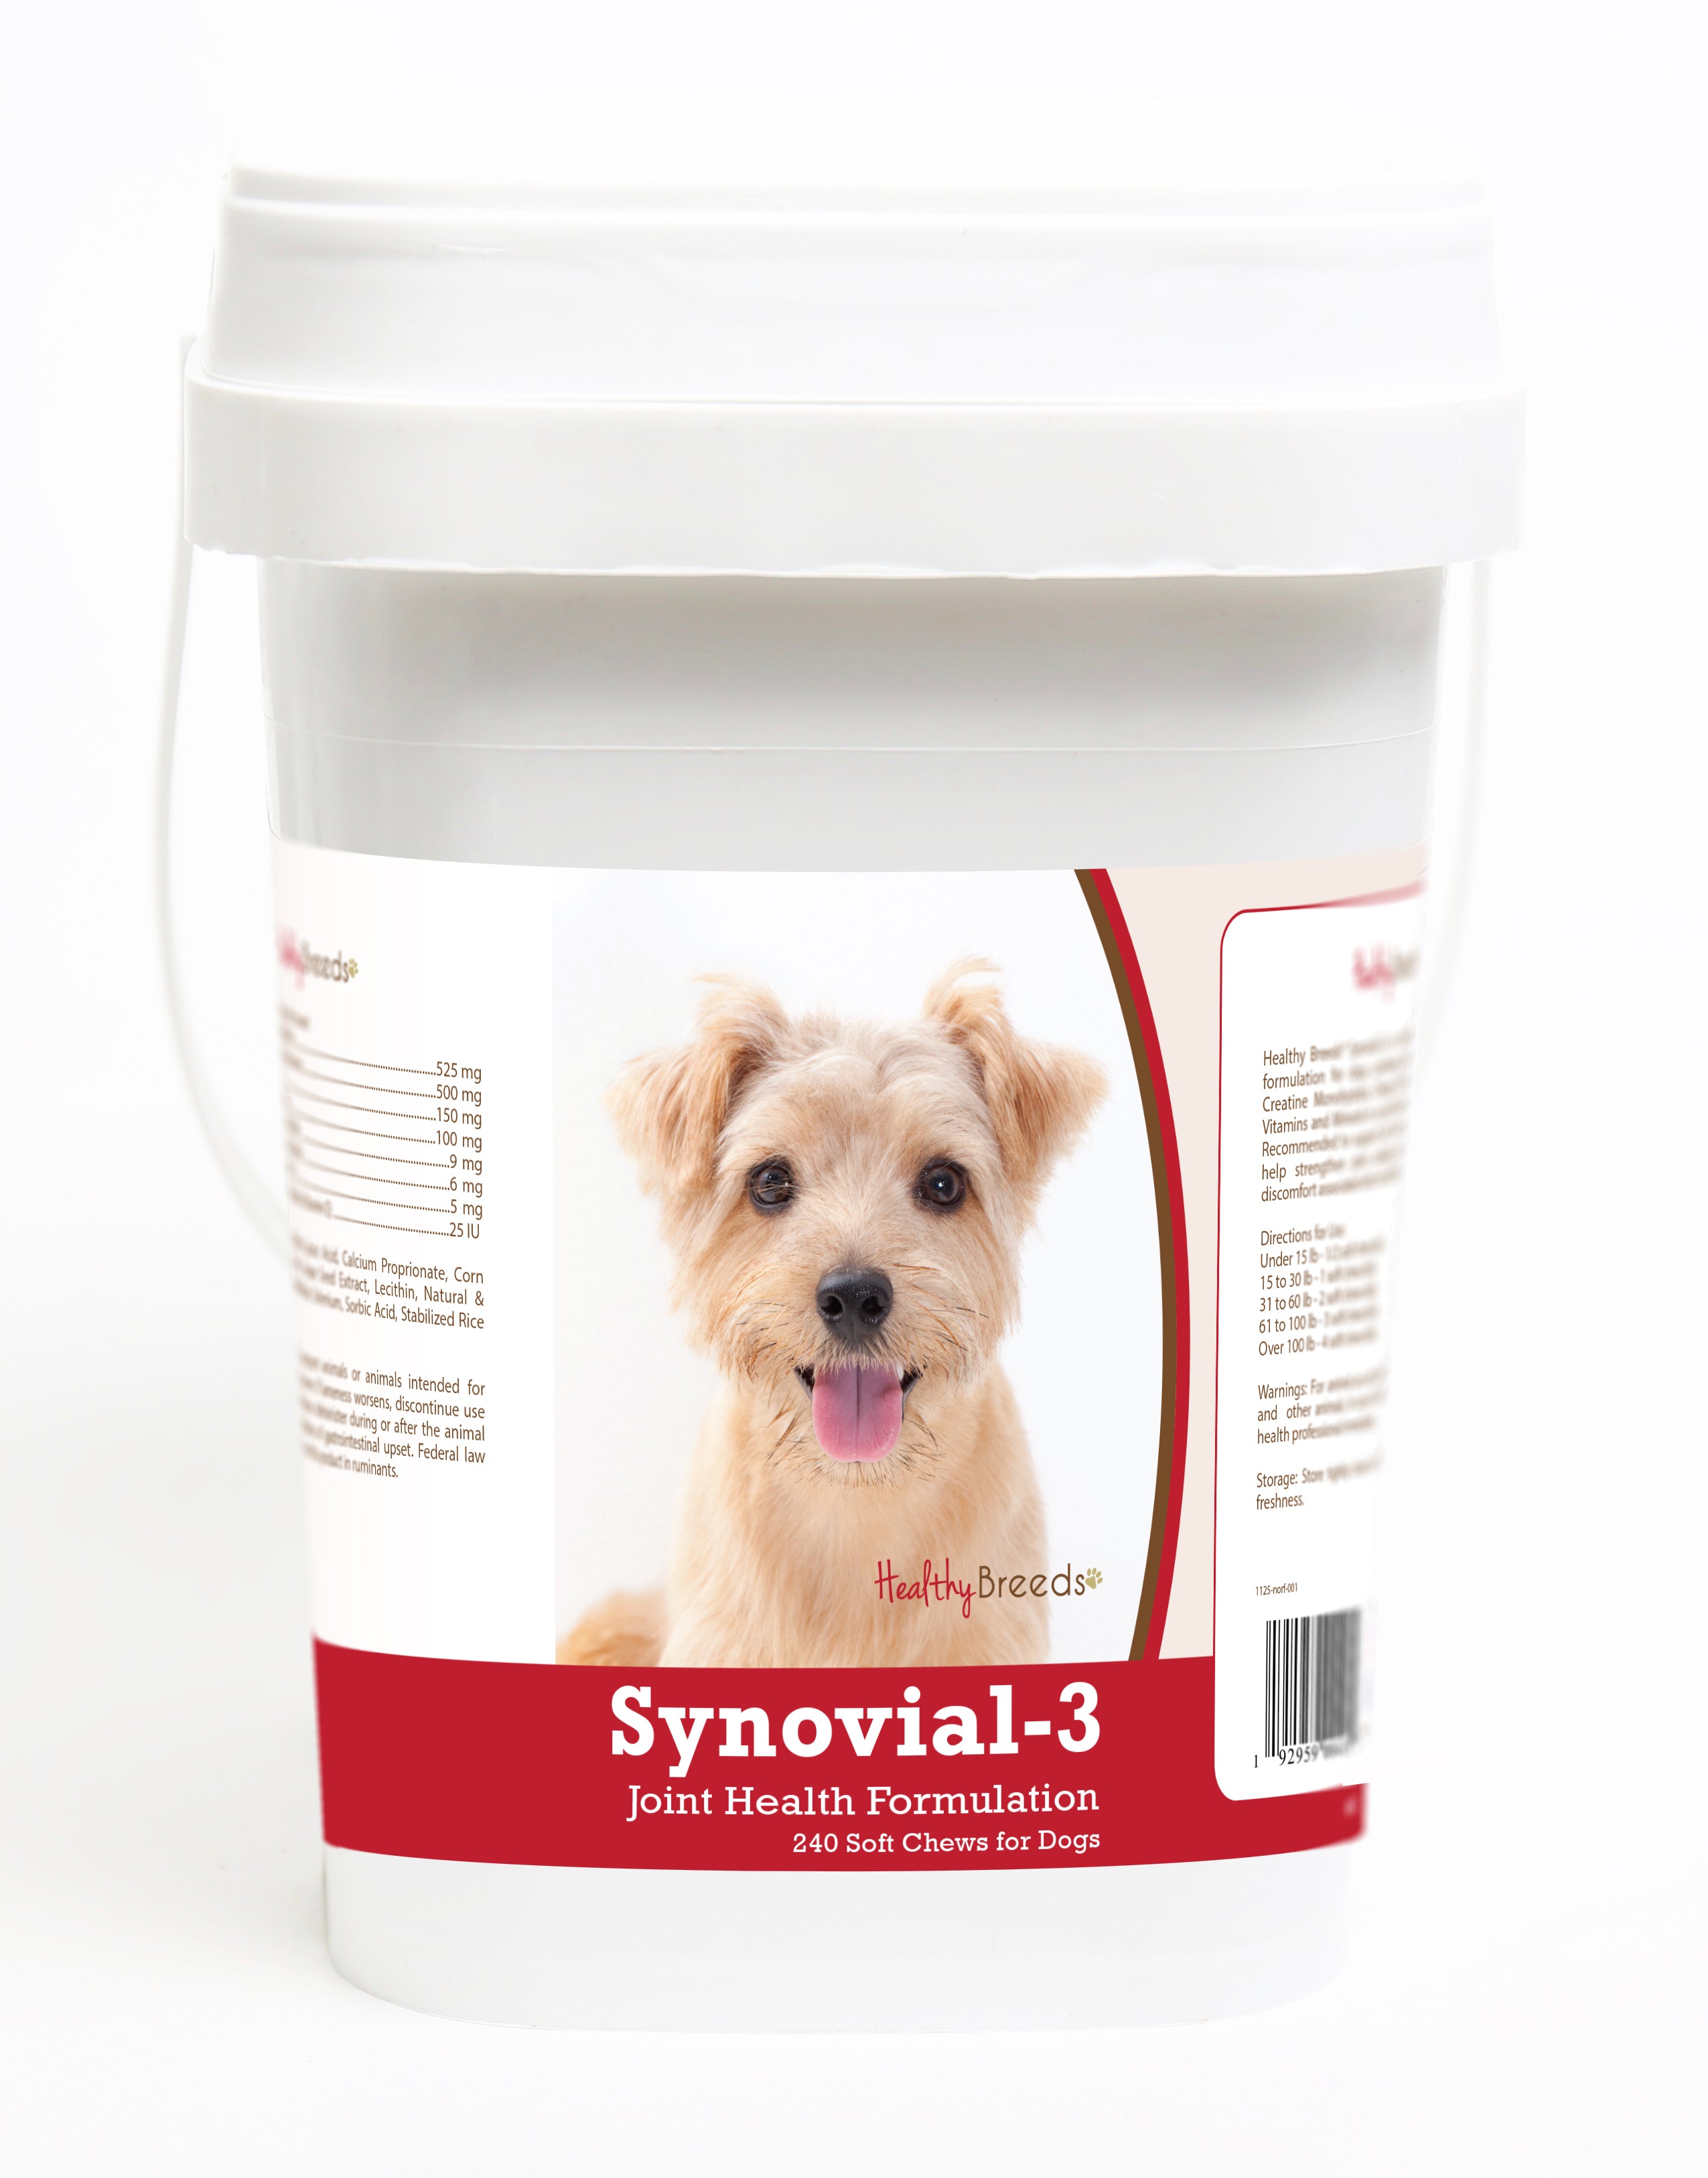 Norfolk Terrier Synovial-3 Joint Health Formulation Soft Chews 240 Count